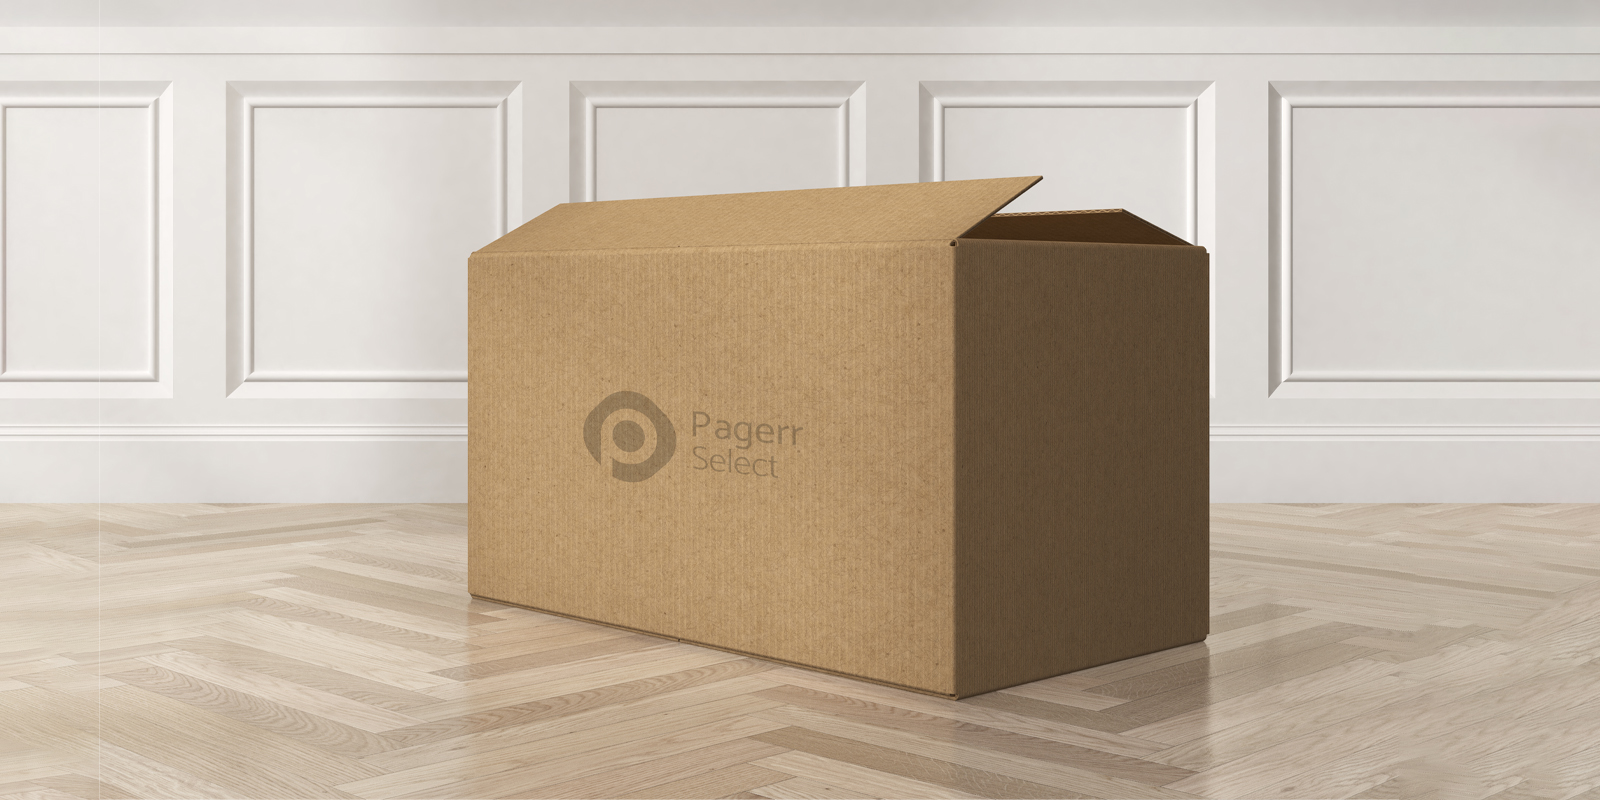 Moving boxes in Melbourne - Print with Pagerr